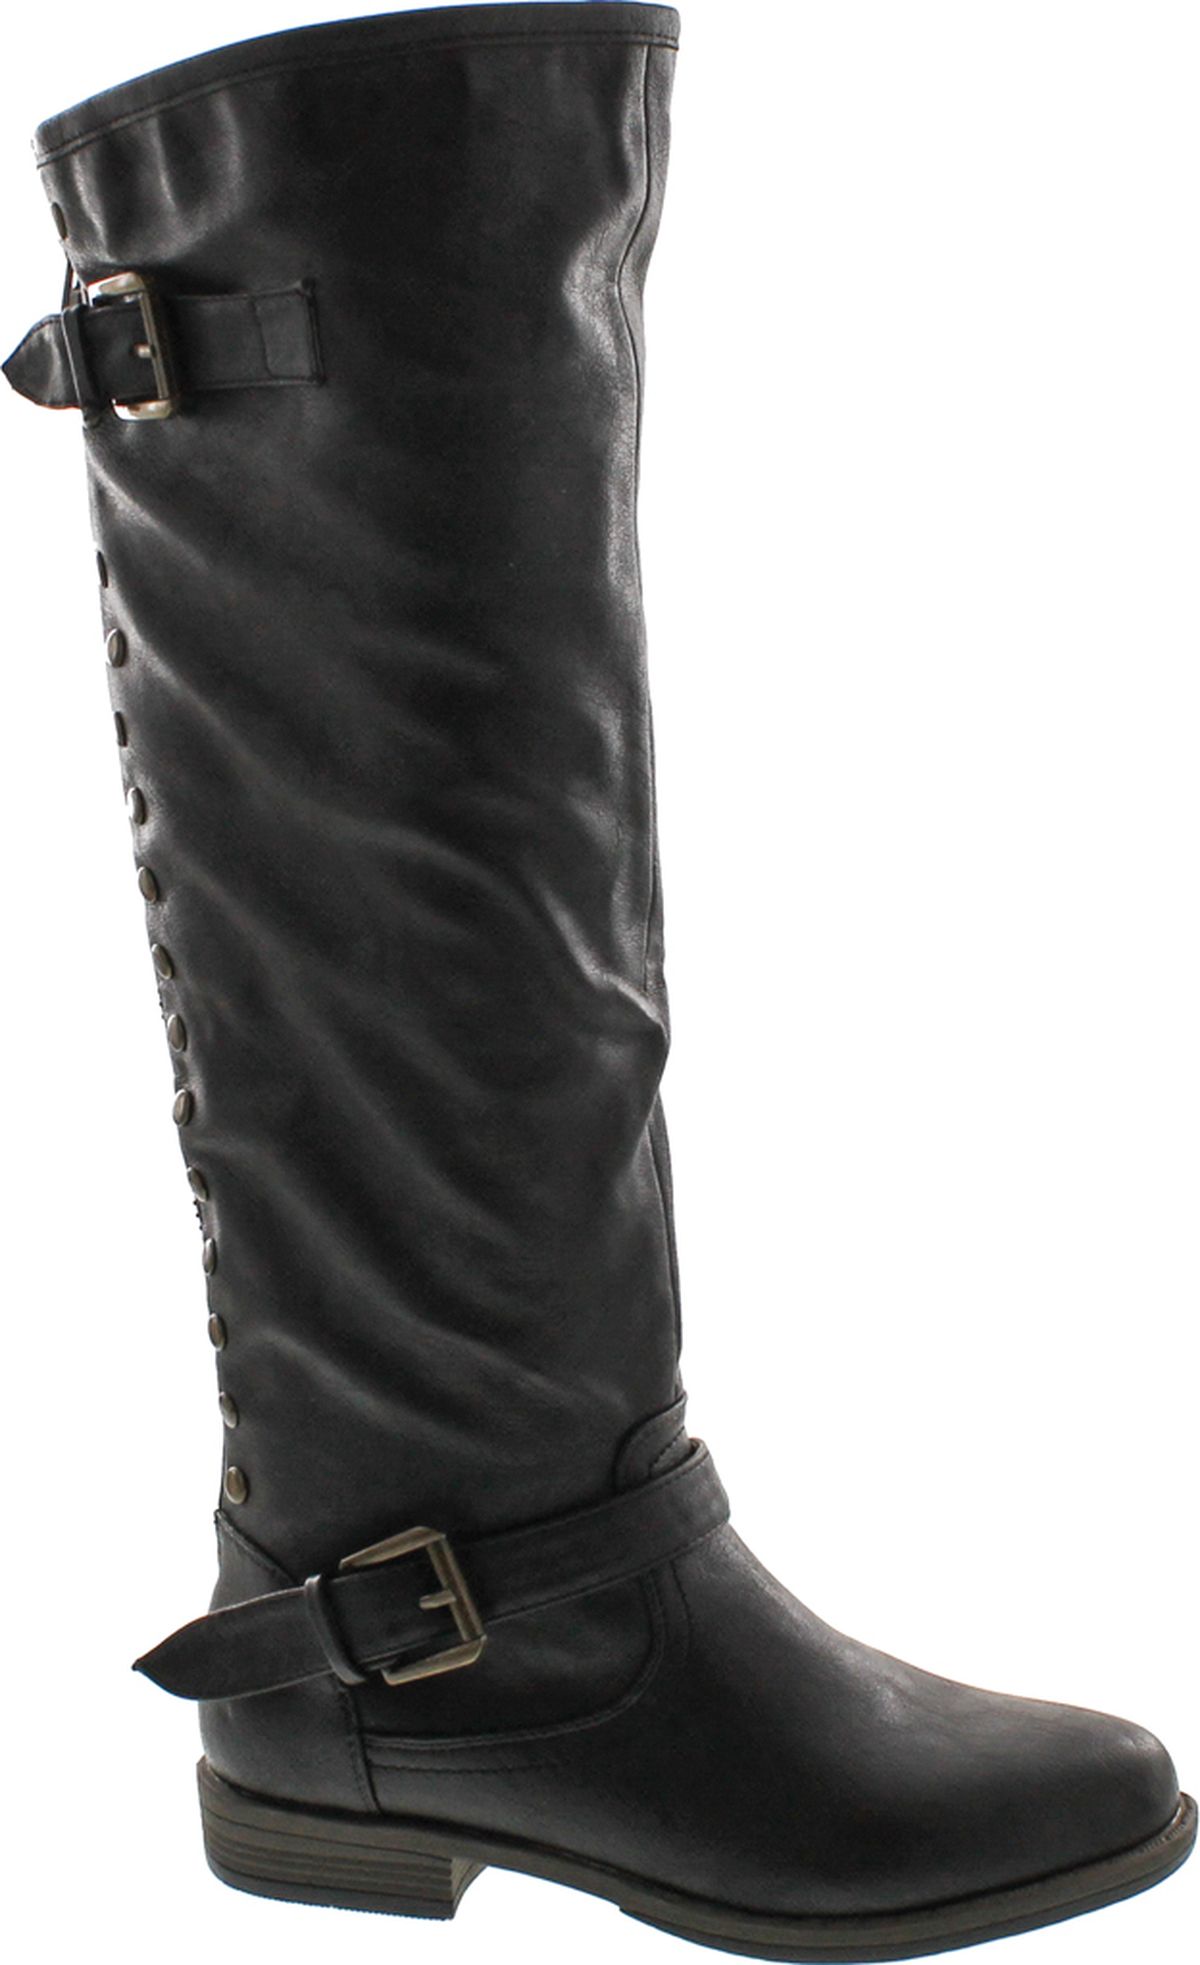 Bamboo Women's Montage 83 Riding Boots with Zipper, Black, 6 - image 1 of 4